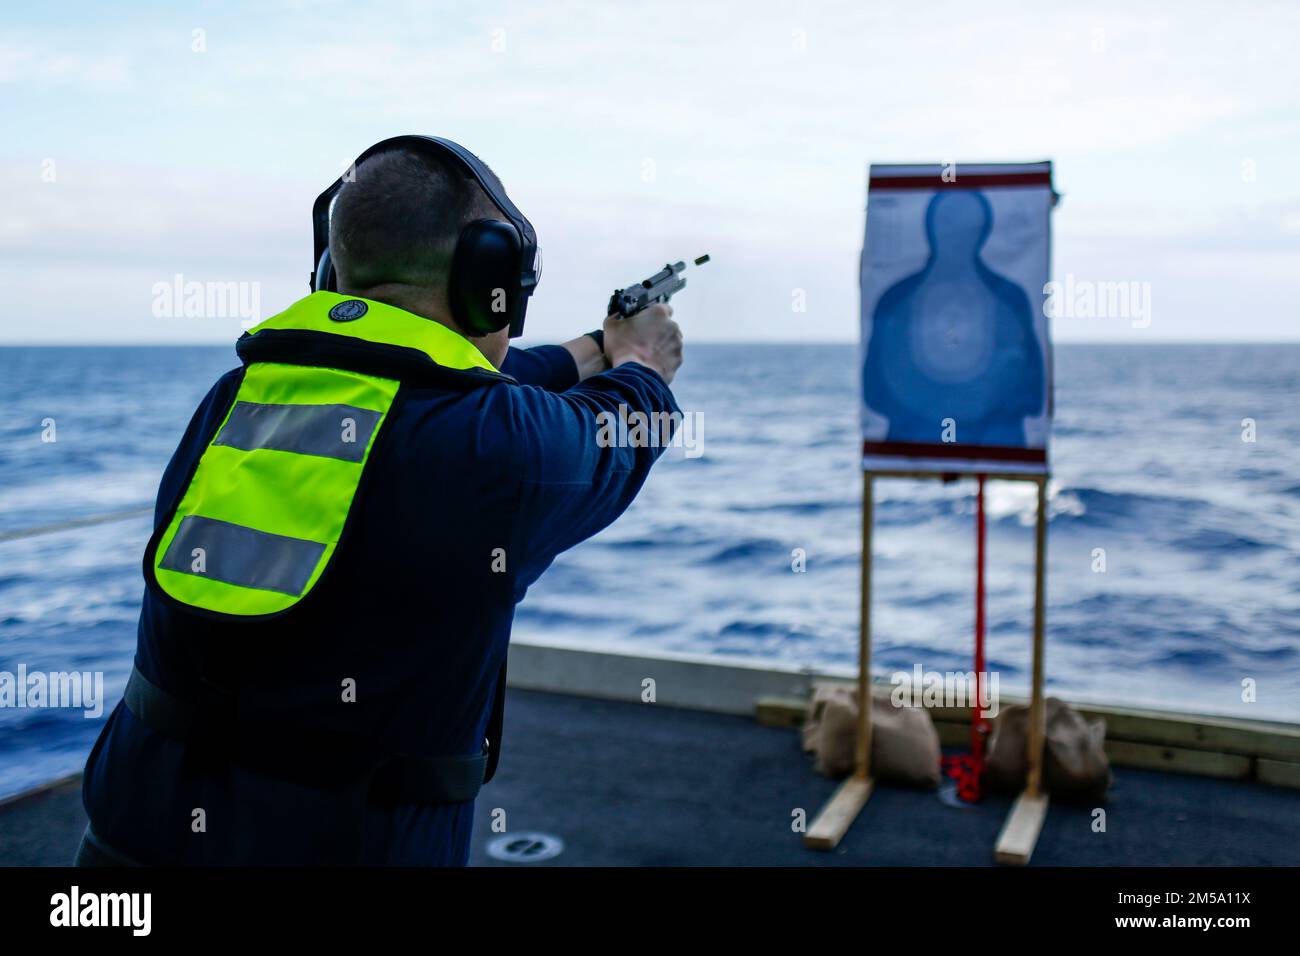 PHILIPPINE SEA (Feb. 13, 2022) Senior Chief Information Systems Technician John Shubert, from Wakeeney, Kan., fires an M9 service pistol during a weapons qualification aboard the Nimitz-class aircraft carrier USS Abraham Lincoln (CVN 72). Abraham Lincoln Strike Group is on a scheduled deployment in the U.S. 7th Fleet area of operations to enhance interoperability through alliances and partnerships while serving as a ready-response force in support of a free and open Indo-Pacific region. Stock Photo